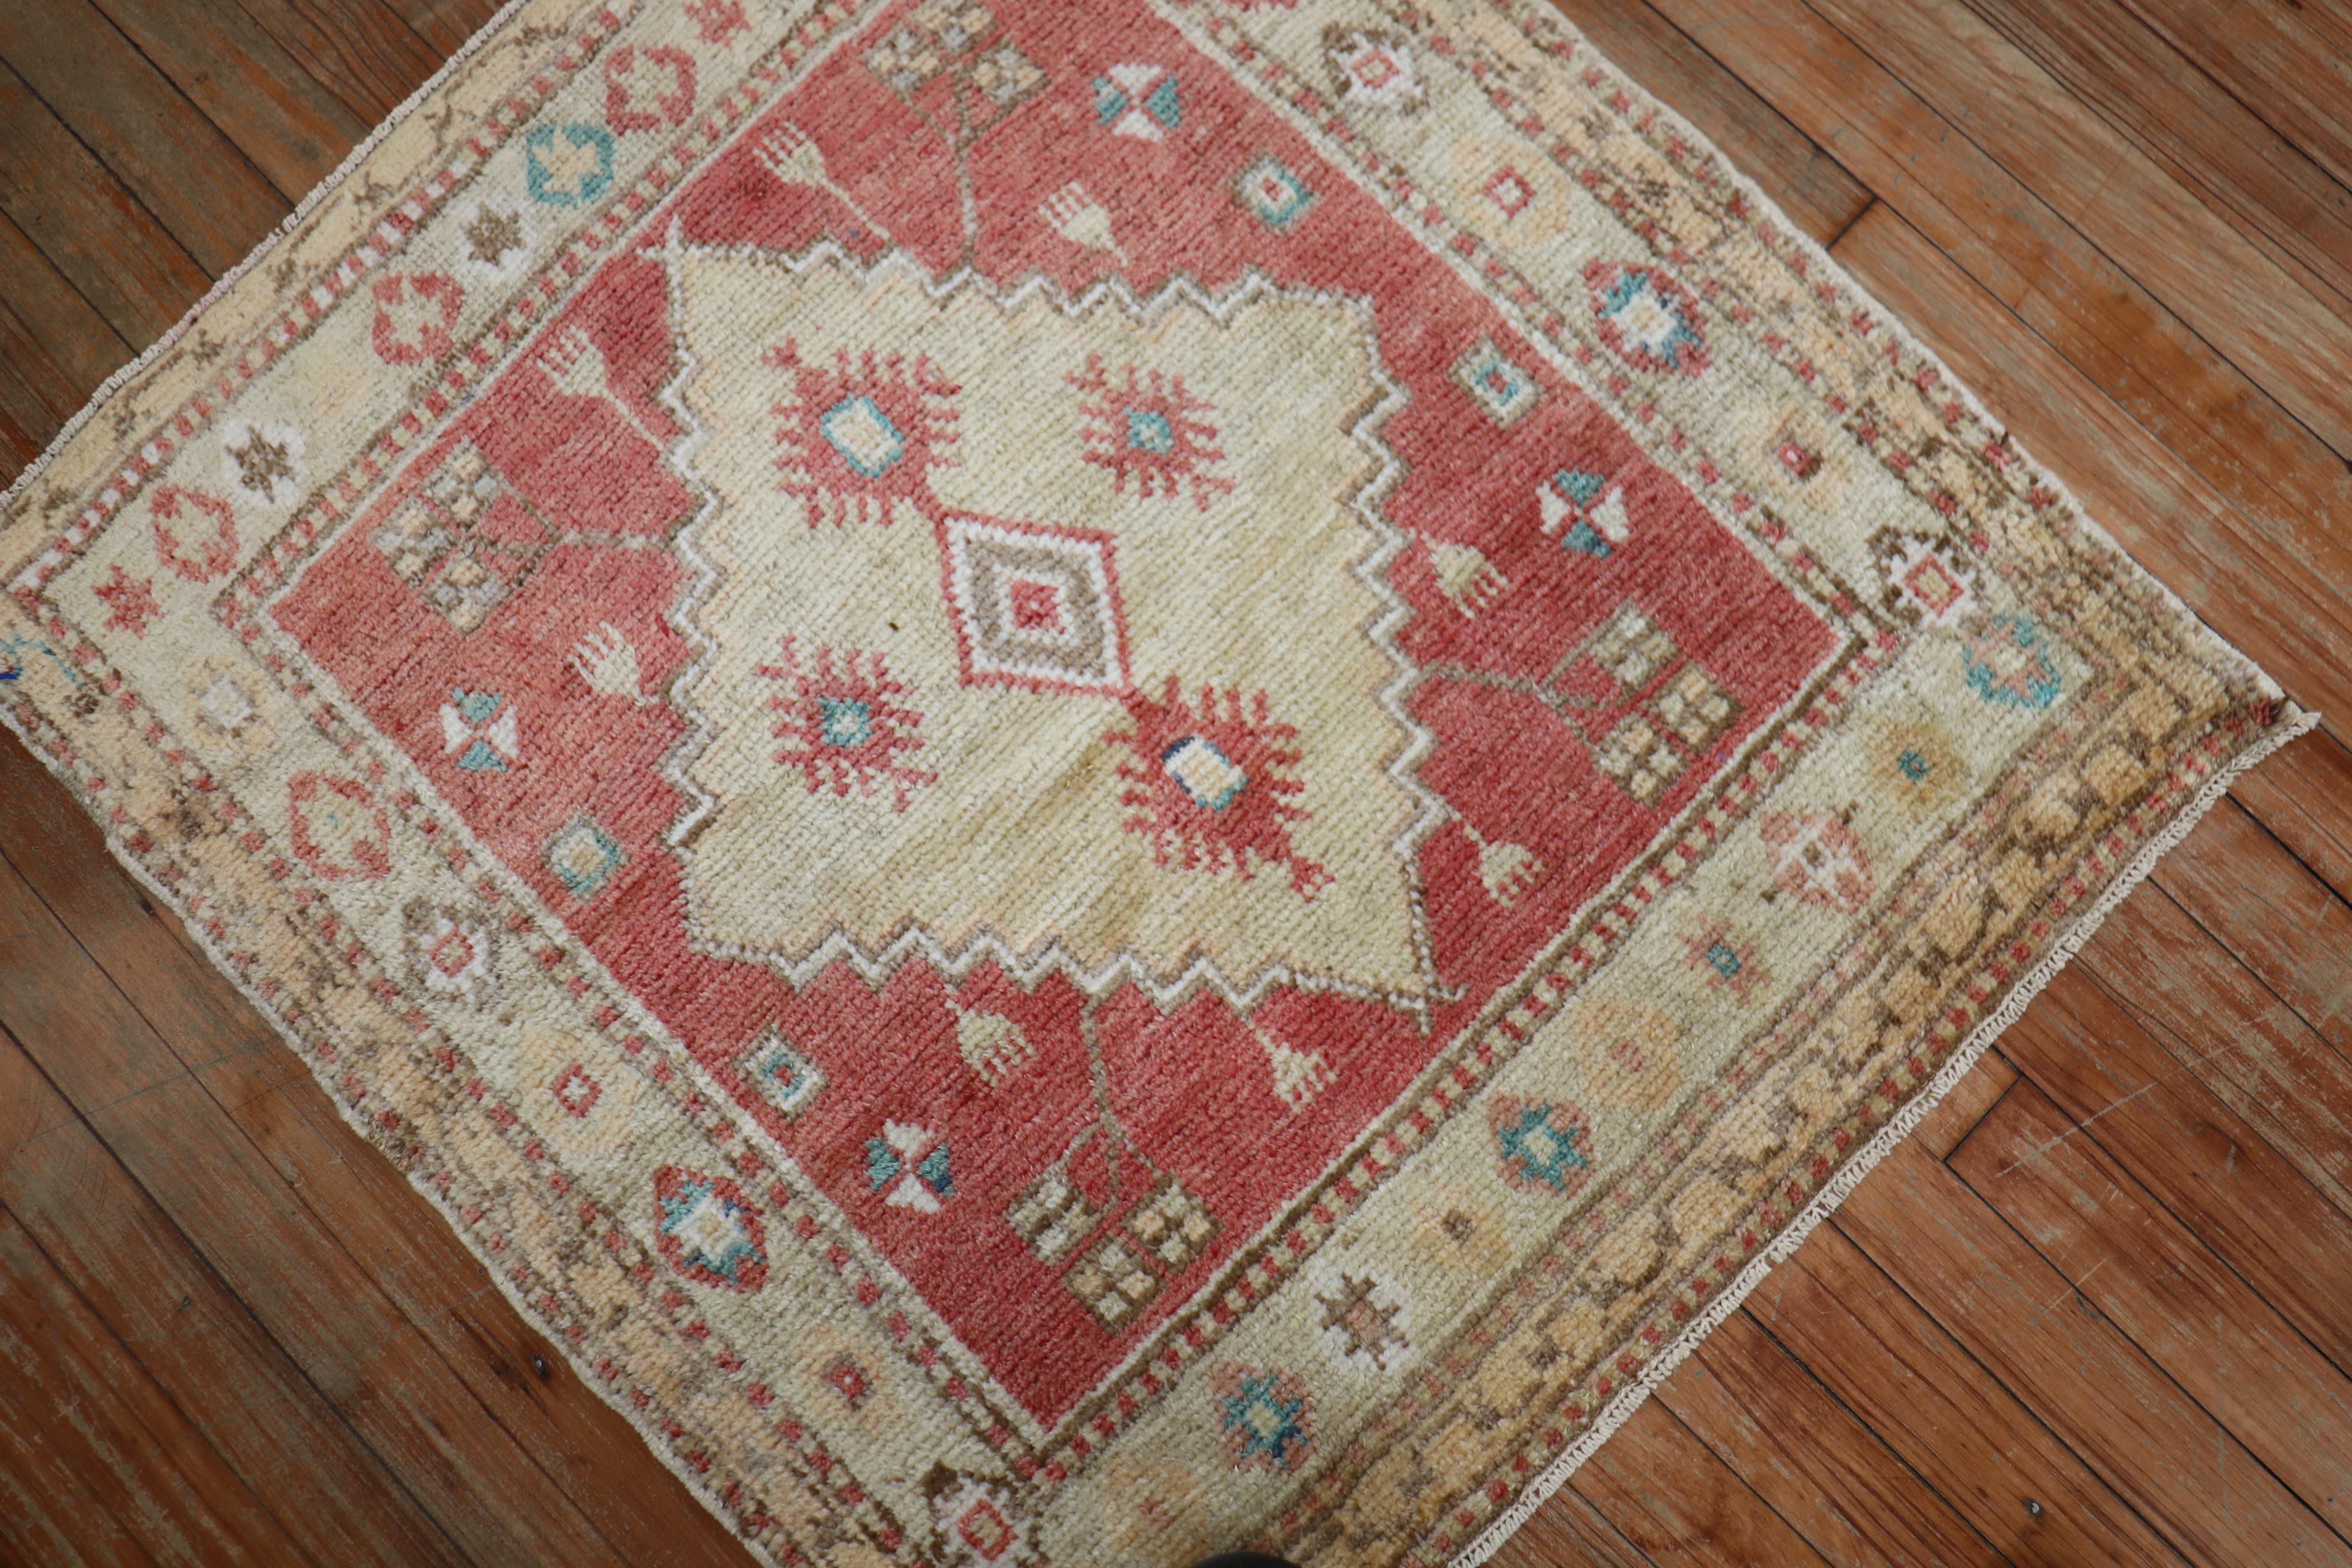 Small mini square mid-20th century one of a kind Turkish Oushak square rug.

Measures: 2'9